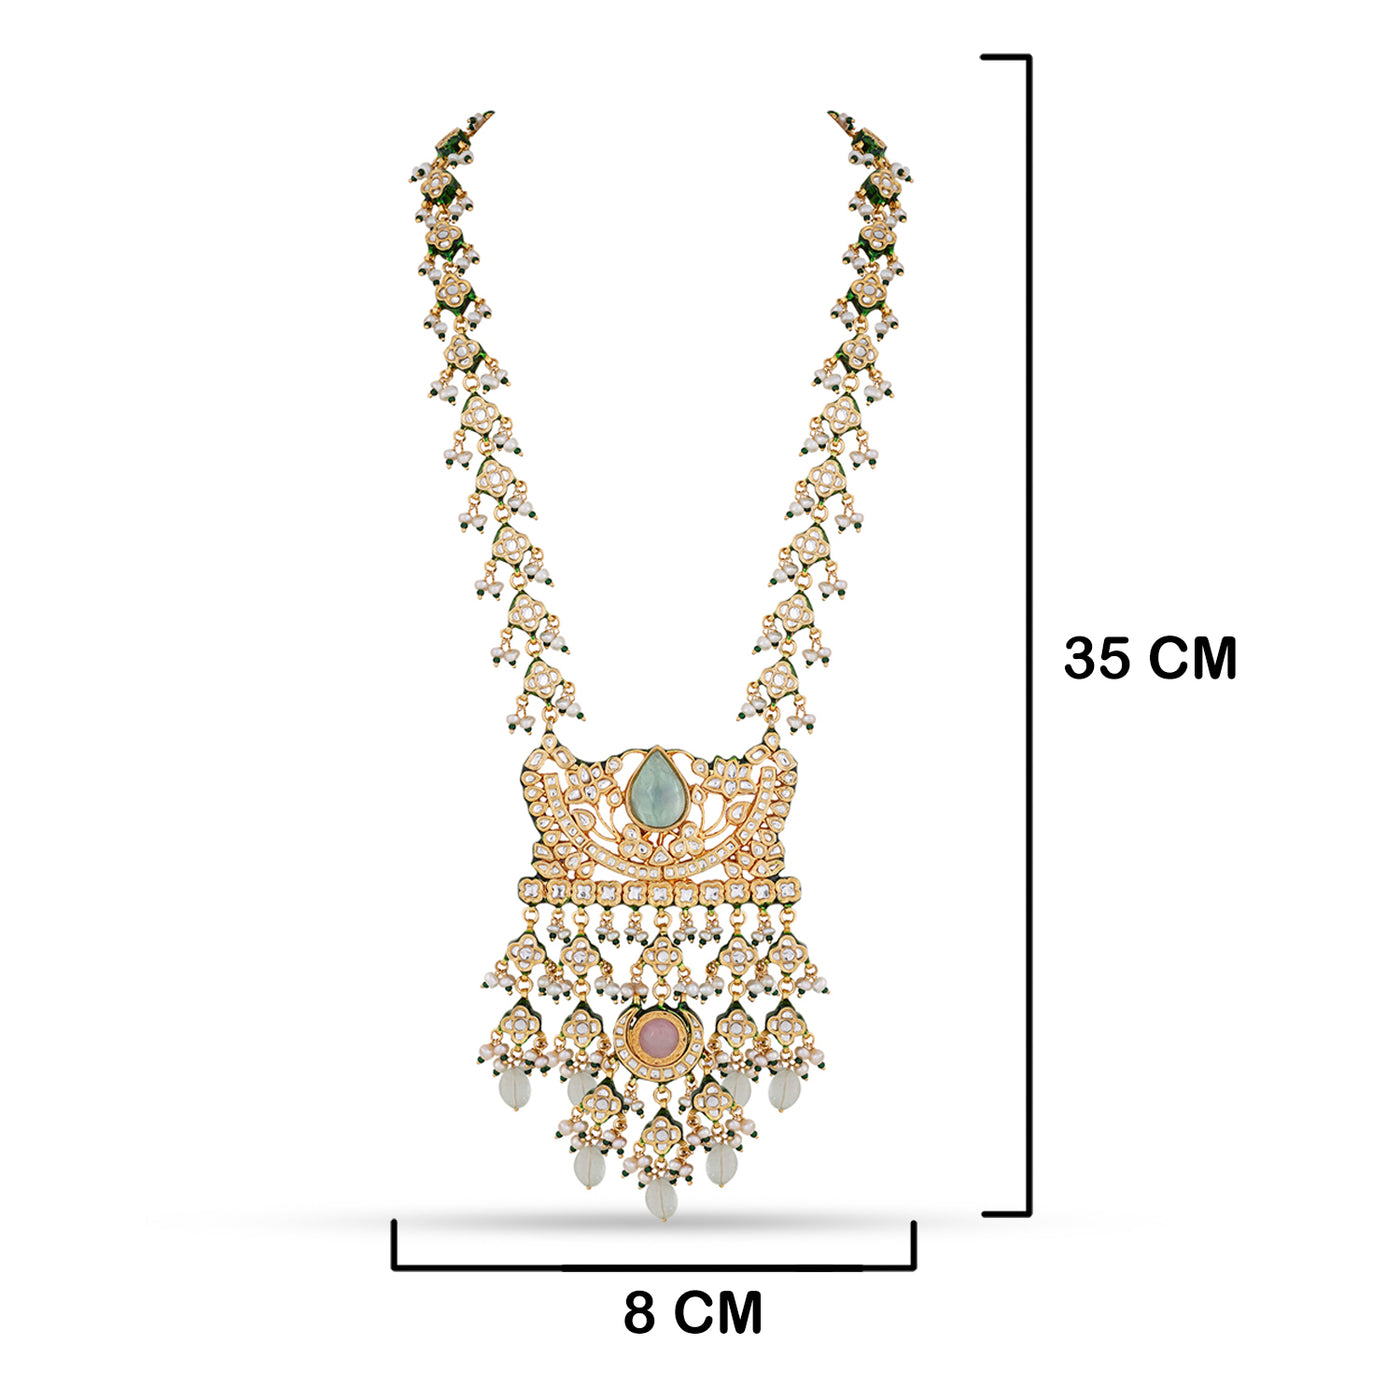 Kundan Long Necklace with measurements in cm. 8cm by 35cm.